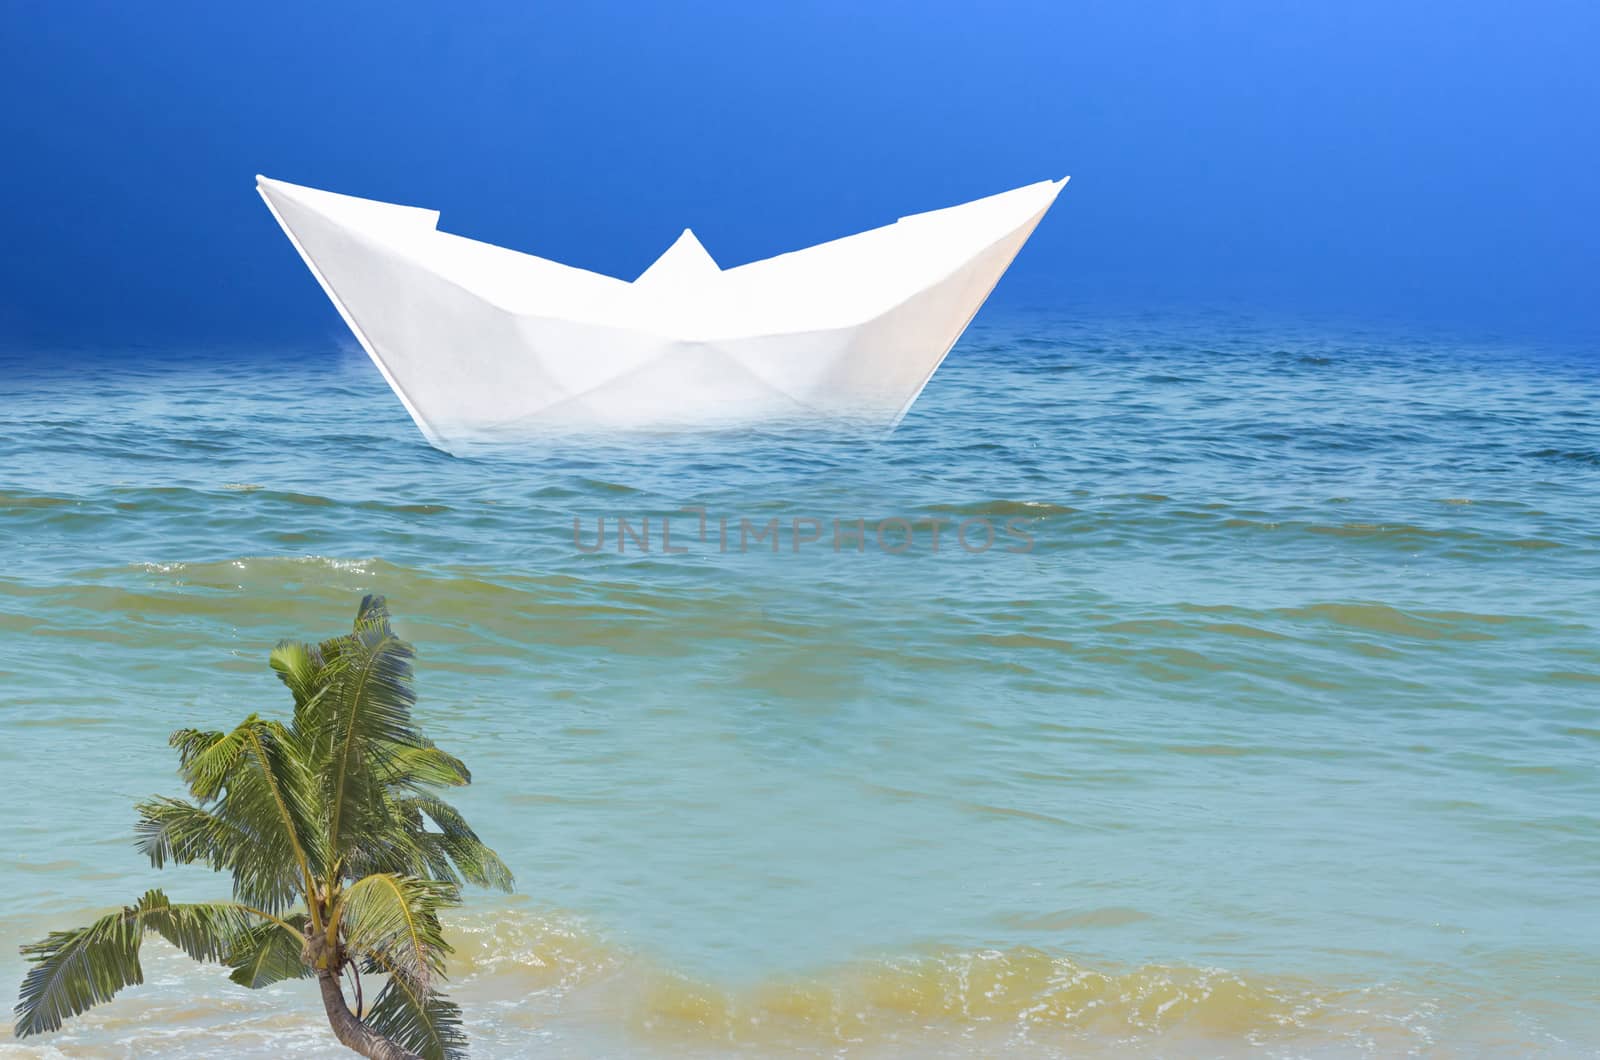  Paper ship in the sea. Symbolizing vacation with cruise ship  by JFsPic